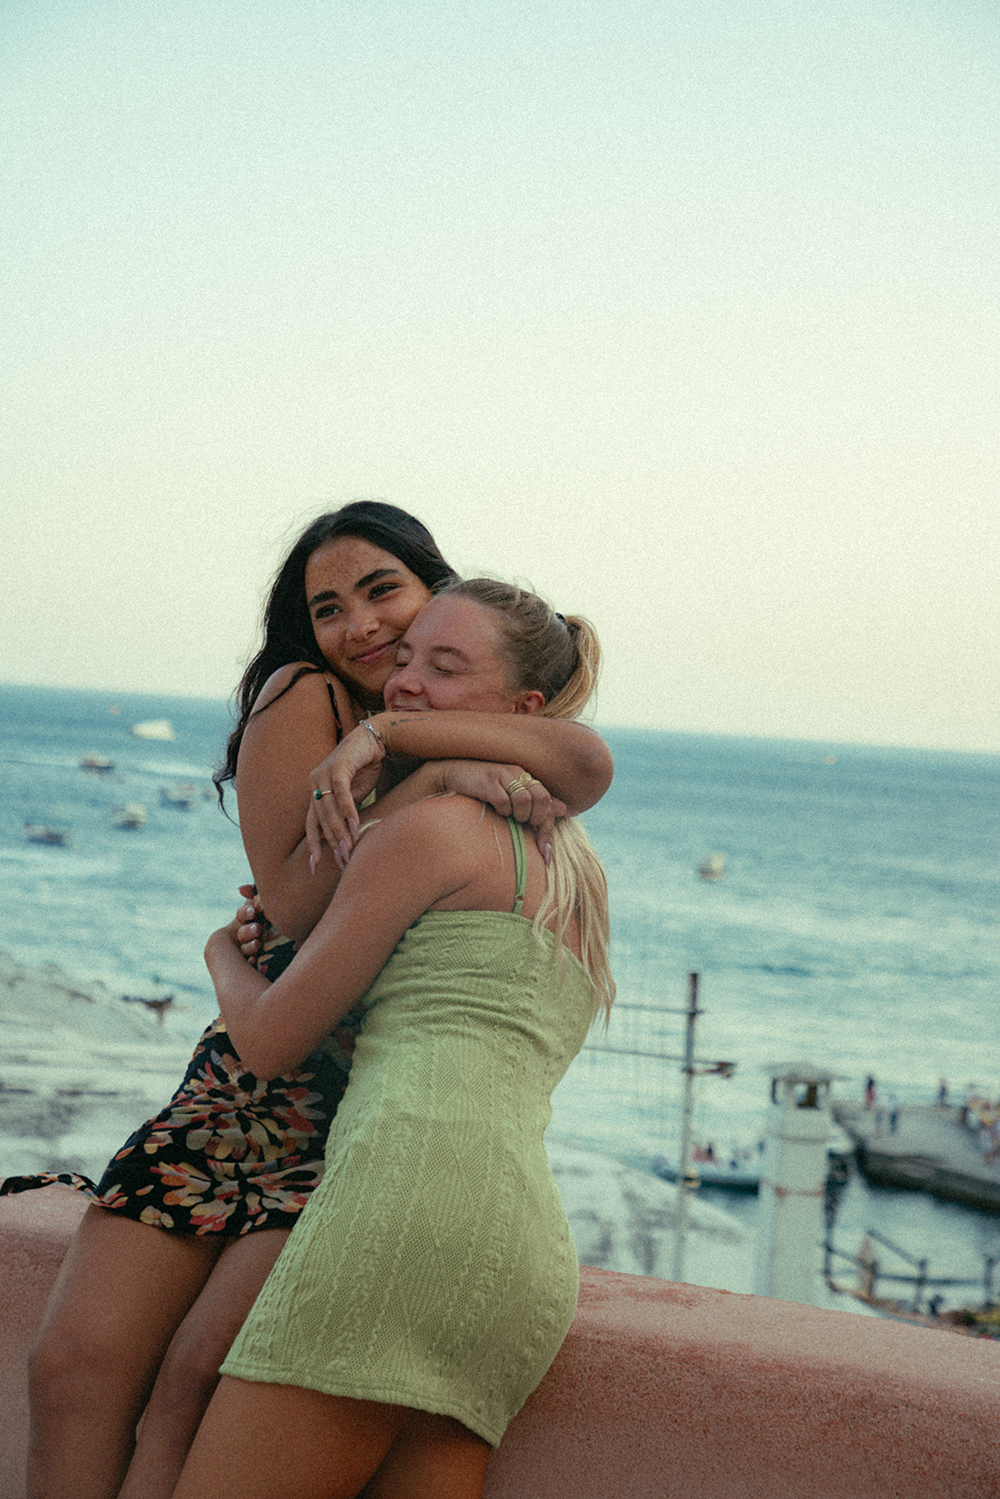 Two girls hugging near the sea, one blonde and one brunette each wearing dresses